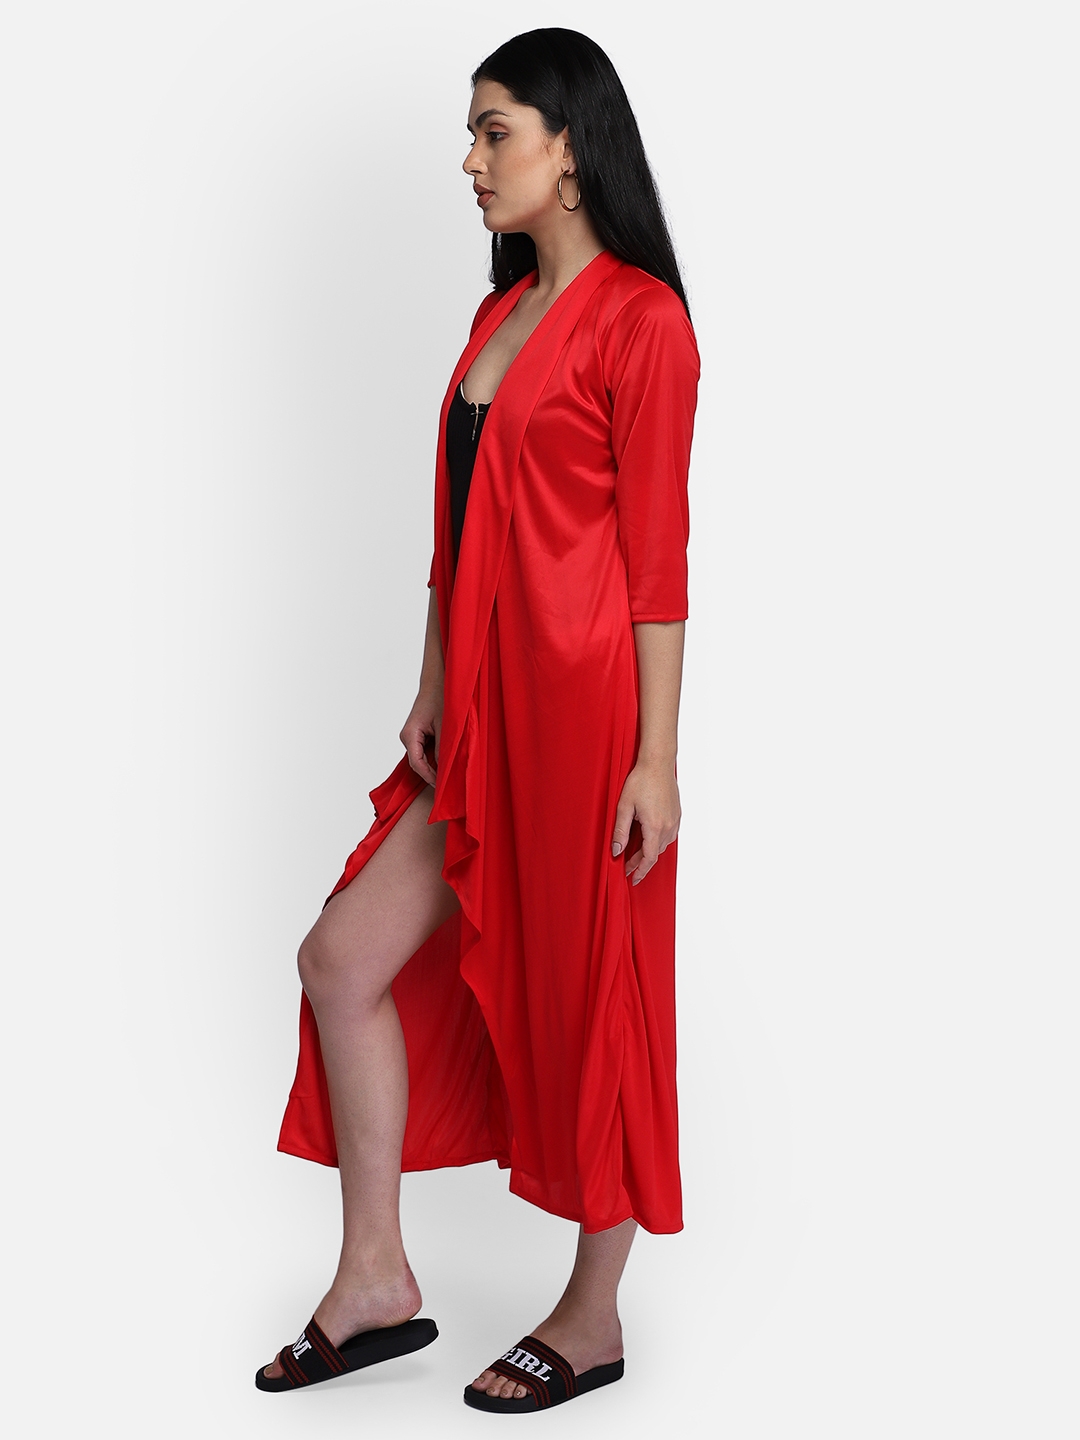 Smarty Pants | Smarty Pants women's solid red color cape cover up 1